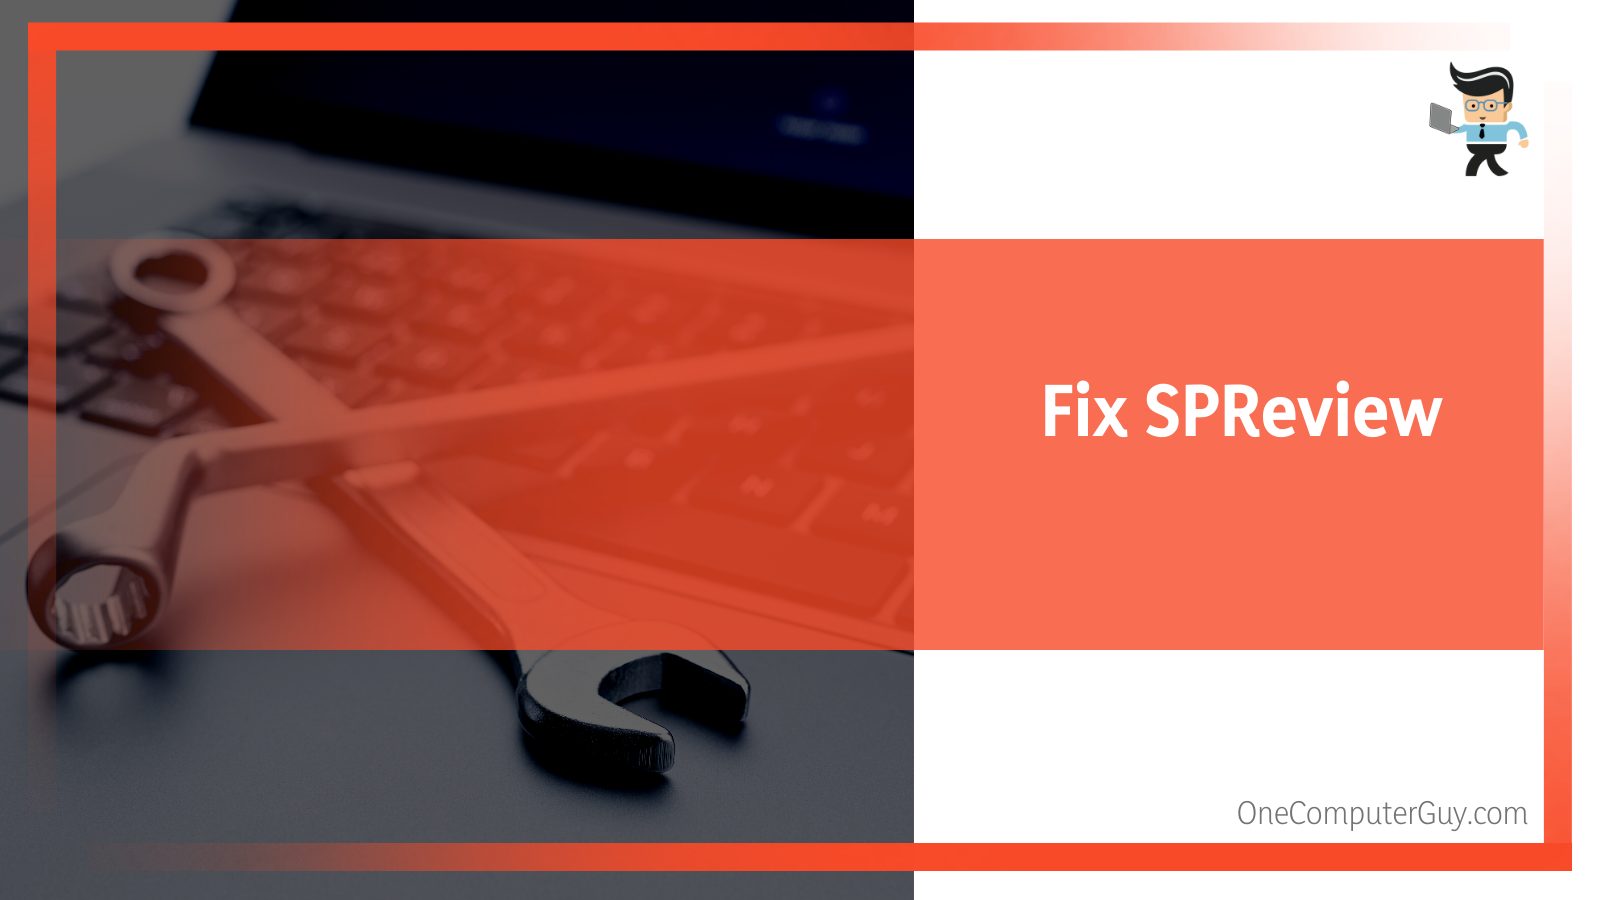 How to Fix SPReview Software